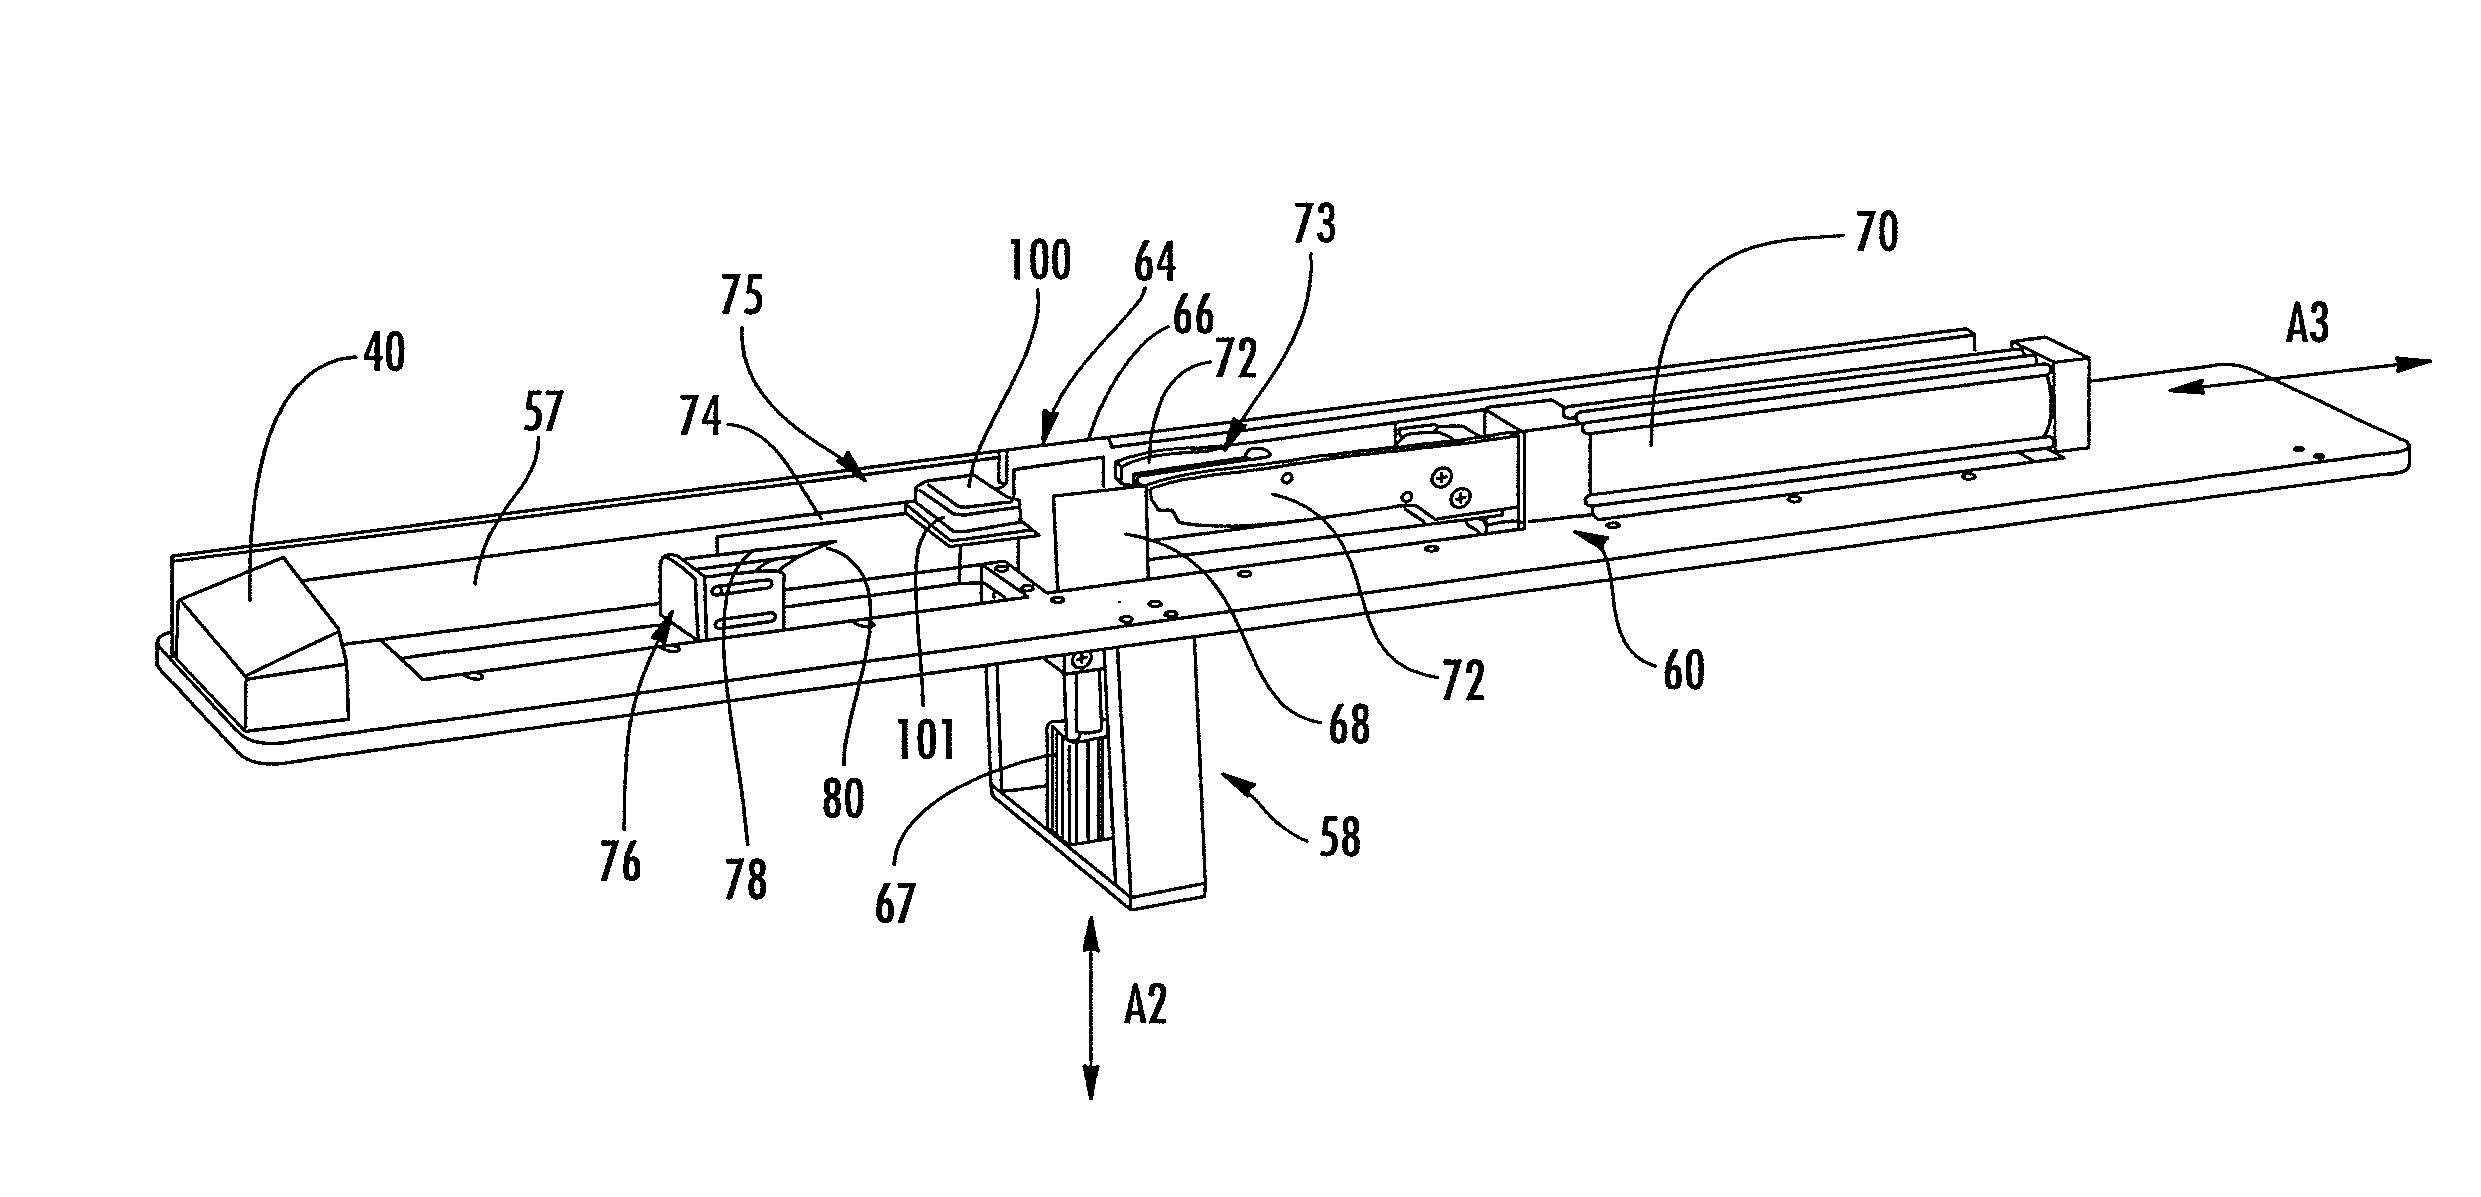 Method of handling clamshell containers containing a particulate aliquot